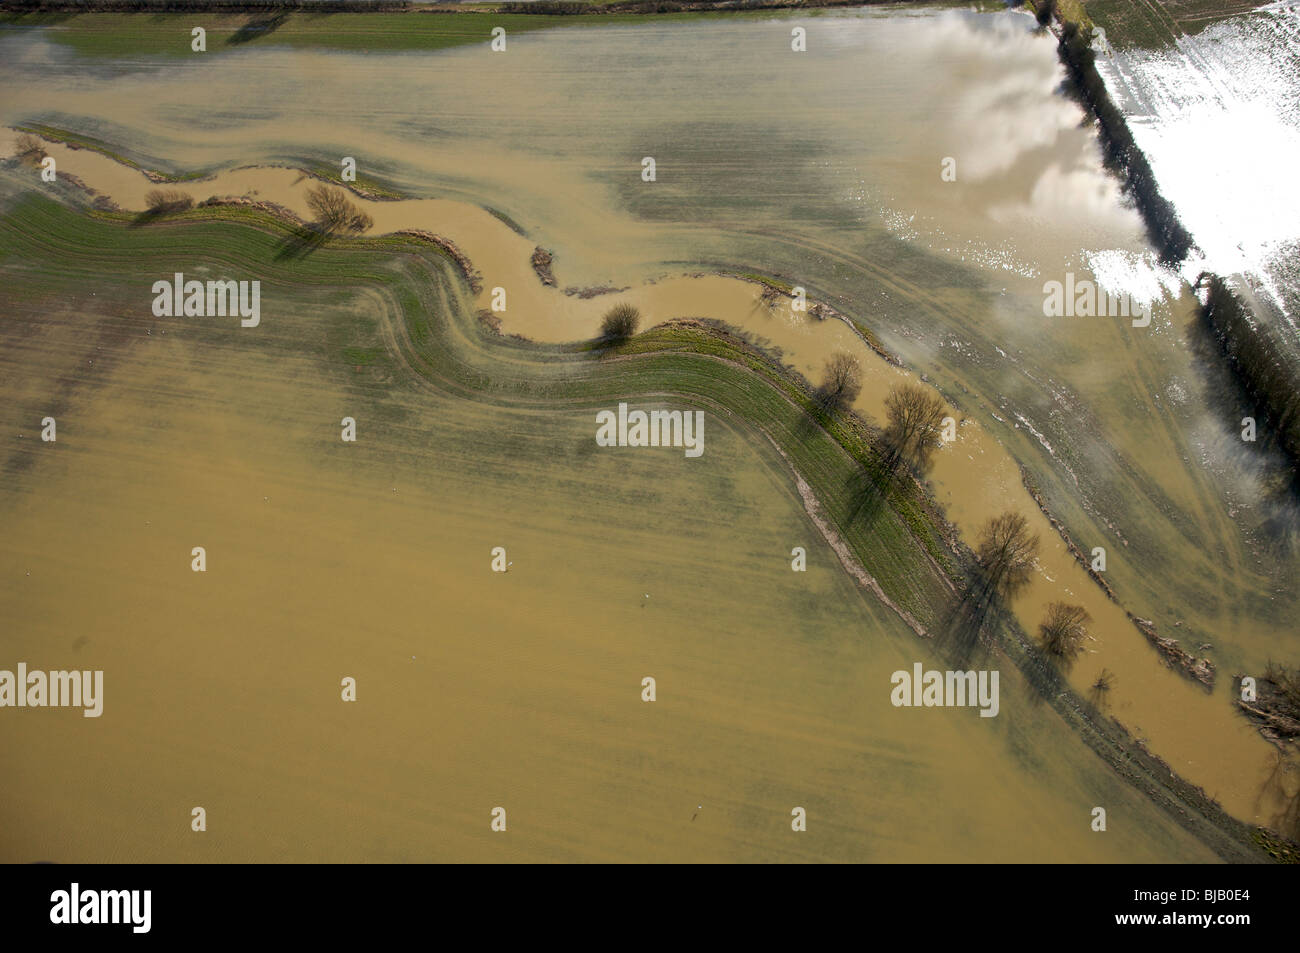 Aerial view of a river bursting it's banks. Stock Photo